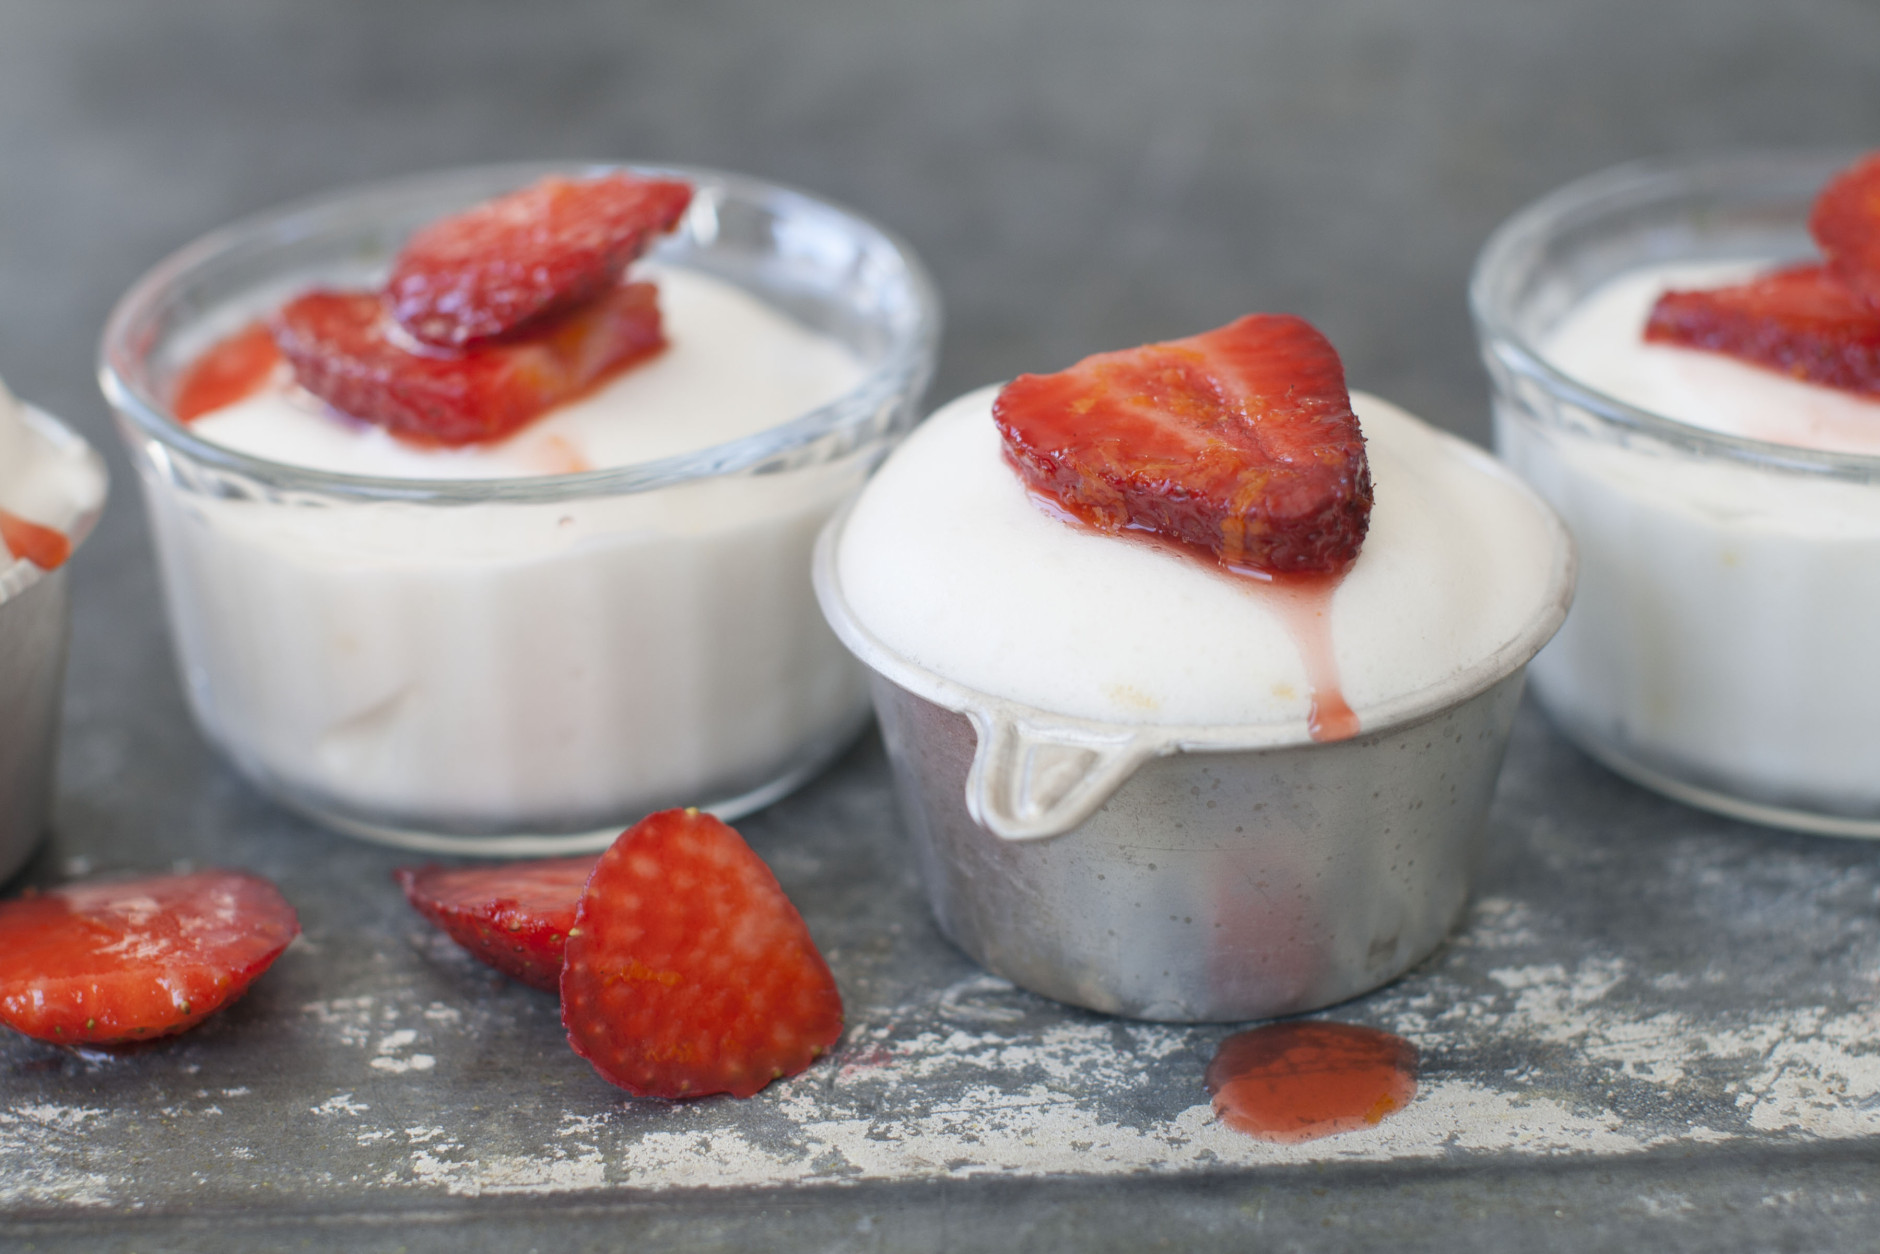 This March 17, 2014 photo shows snow pudding with spiked strawberries in Concord, N.H. (AP Photo/Matthew Mead)